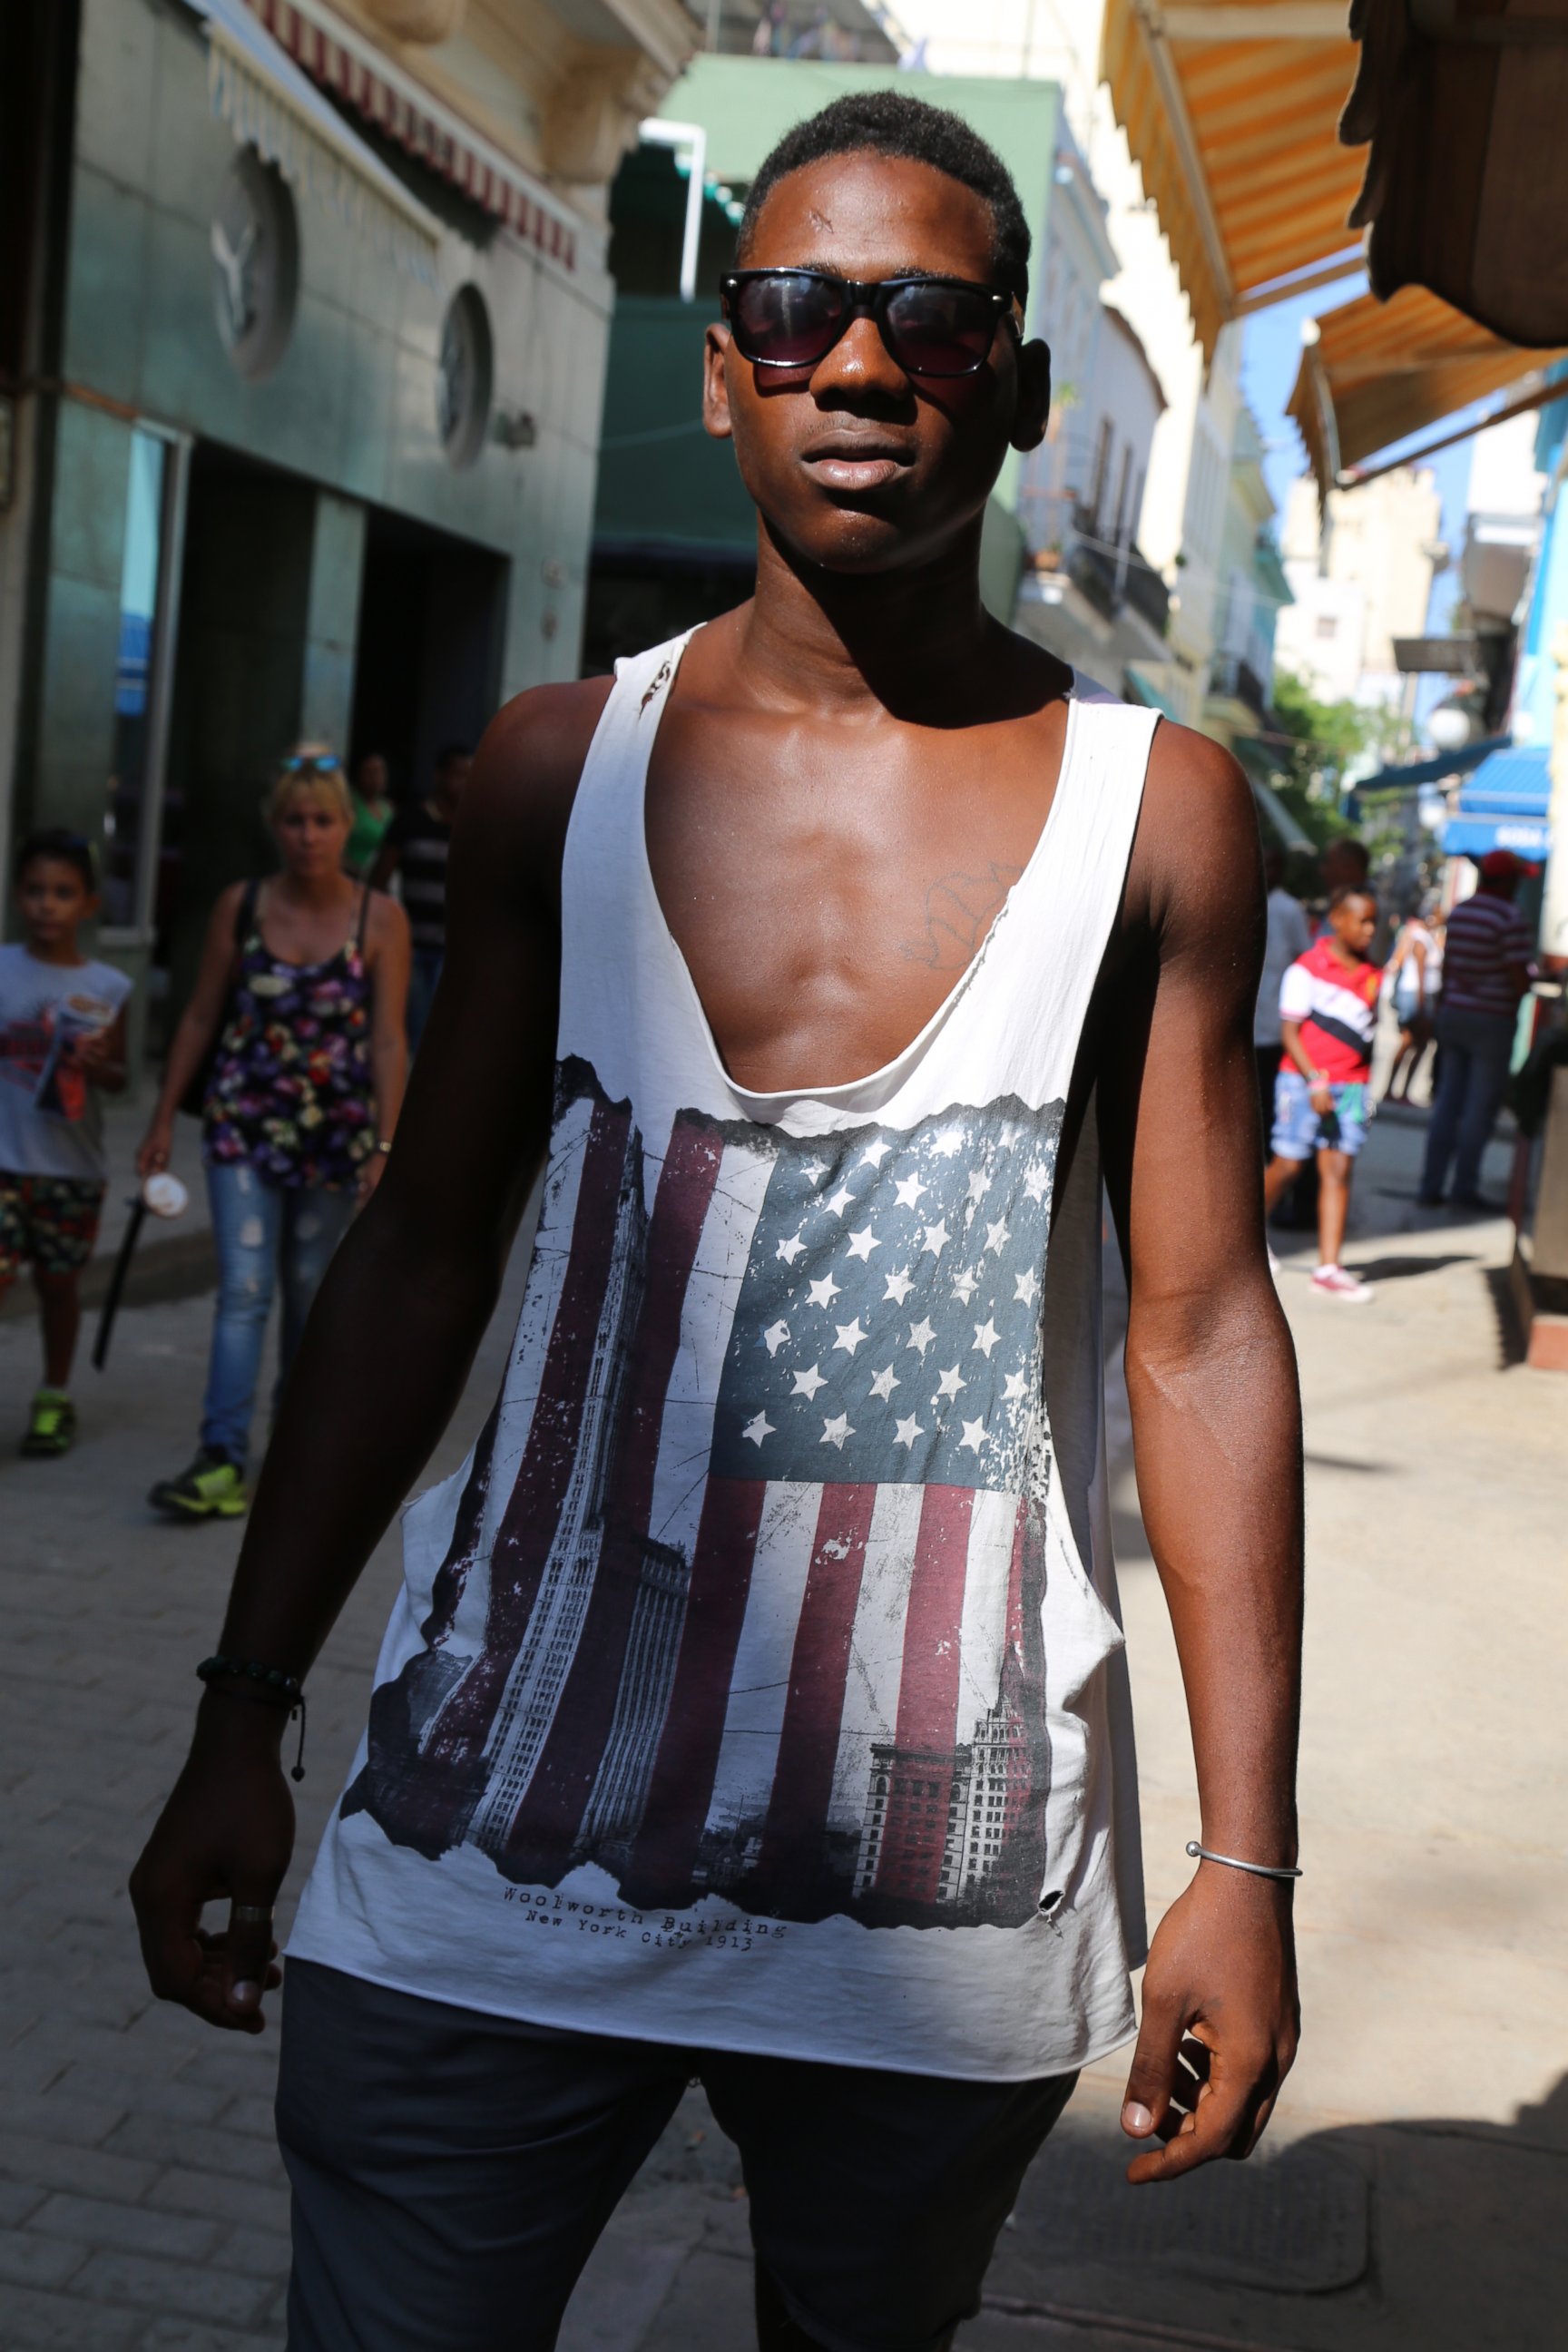 PHOTO: 21-year-old Alexis Vidal Sobori stands on a street in Cuba wearing his American flag sleeveless shirt on August 12, 2015. 